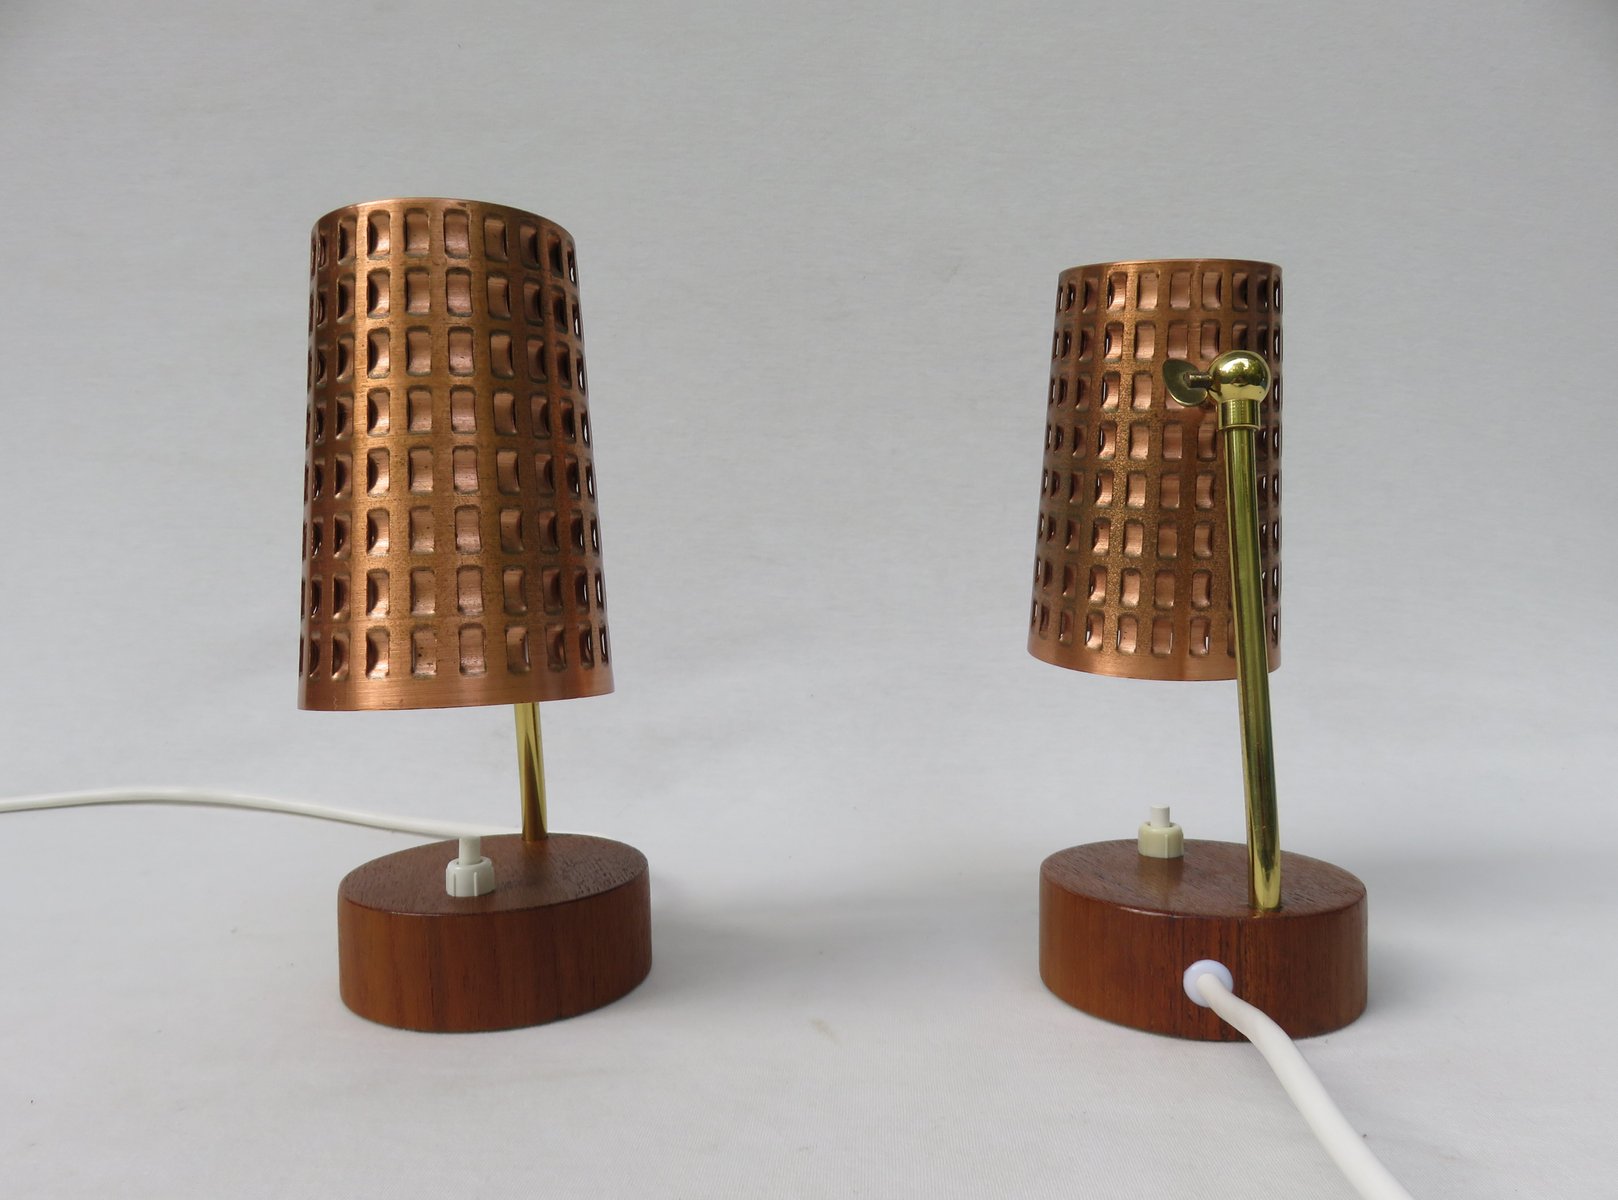 Scandinavian Bedside Lamps, 1950s, Set of 2 for sale at Pamono